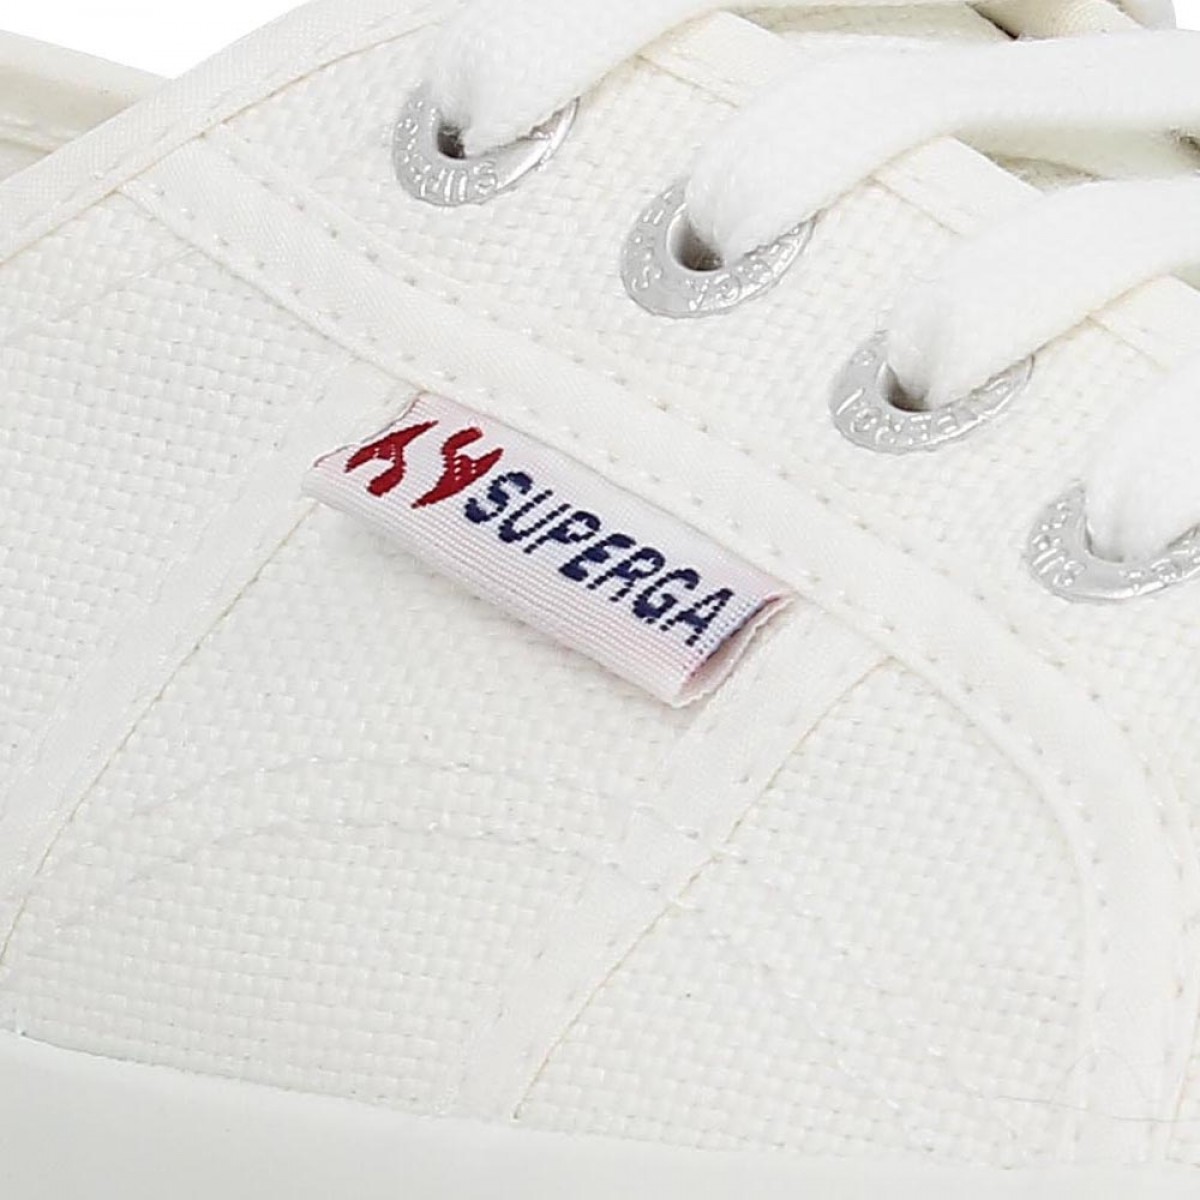 Superga 2750 homme blanc | Fanny chaussures